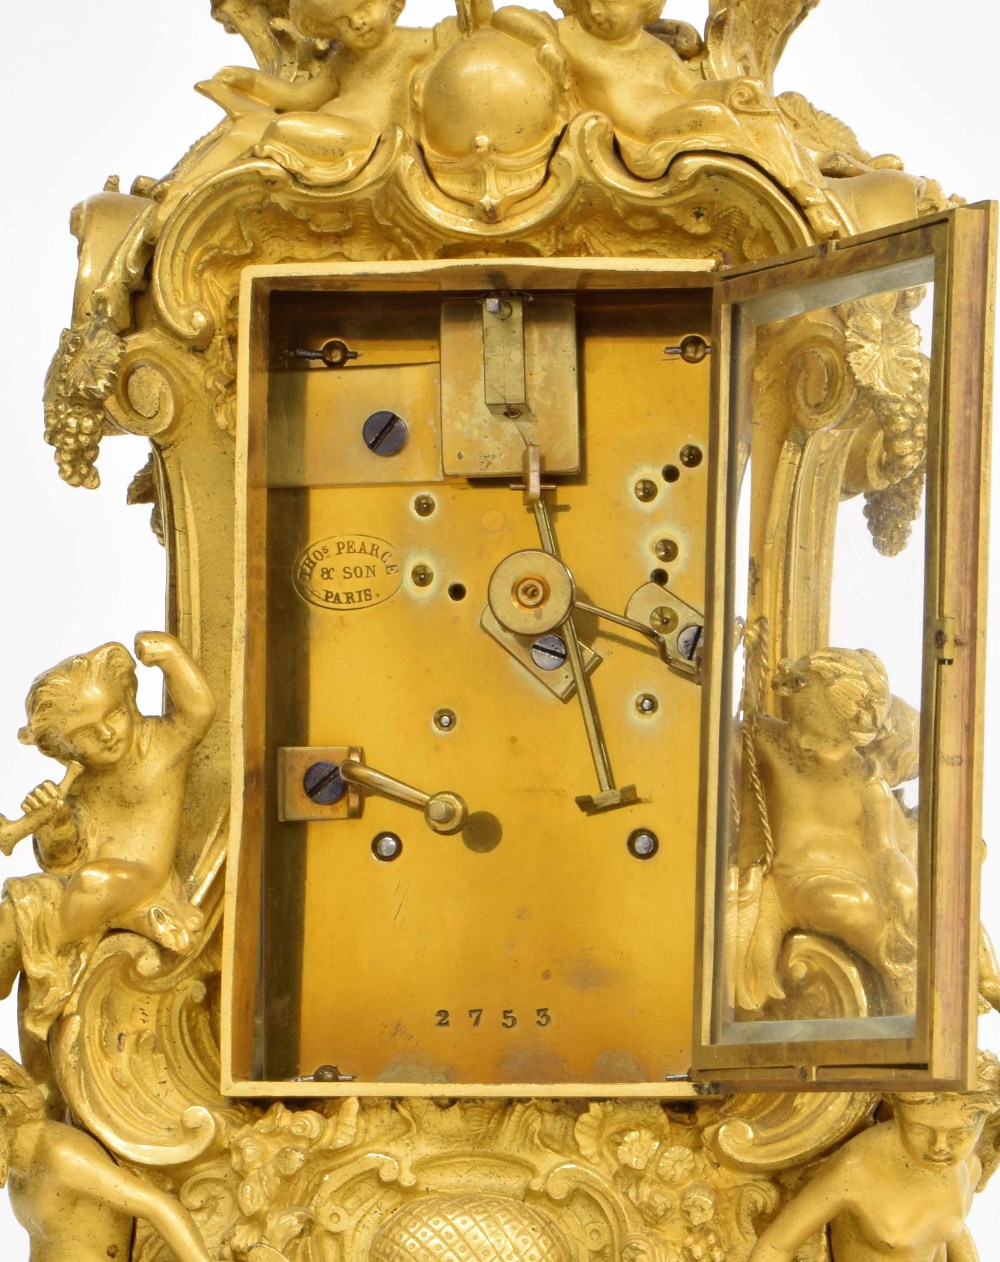 Ormolu travelling clock, circa 1840, with an enamel dial signed for Thos. Pearce Paris and similarly - Image 4 of 4